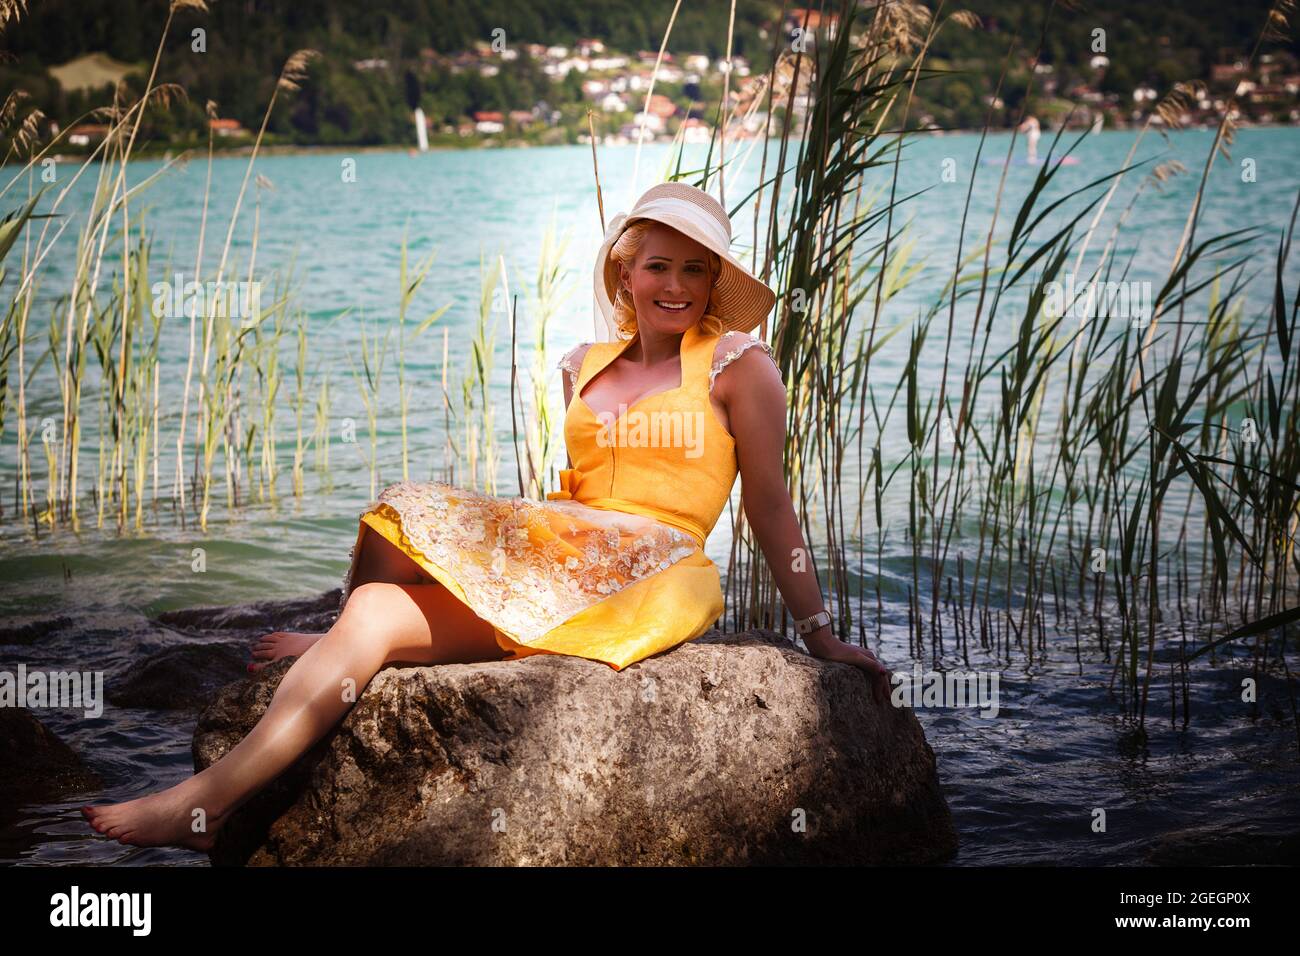 Elegant woman with dirndl and sun hat sits smiling on a rock in a lake Stock Photo